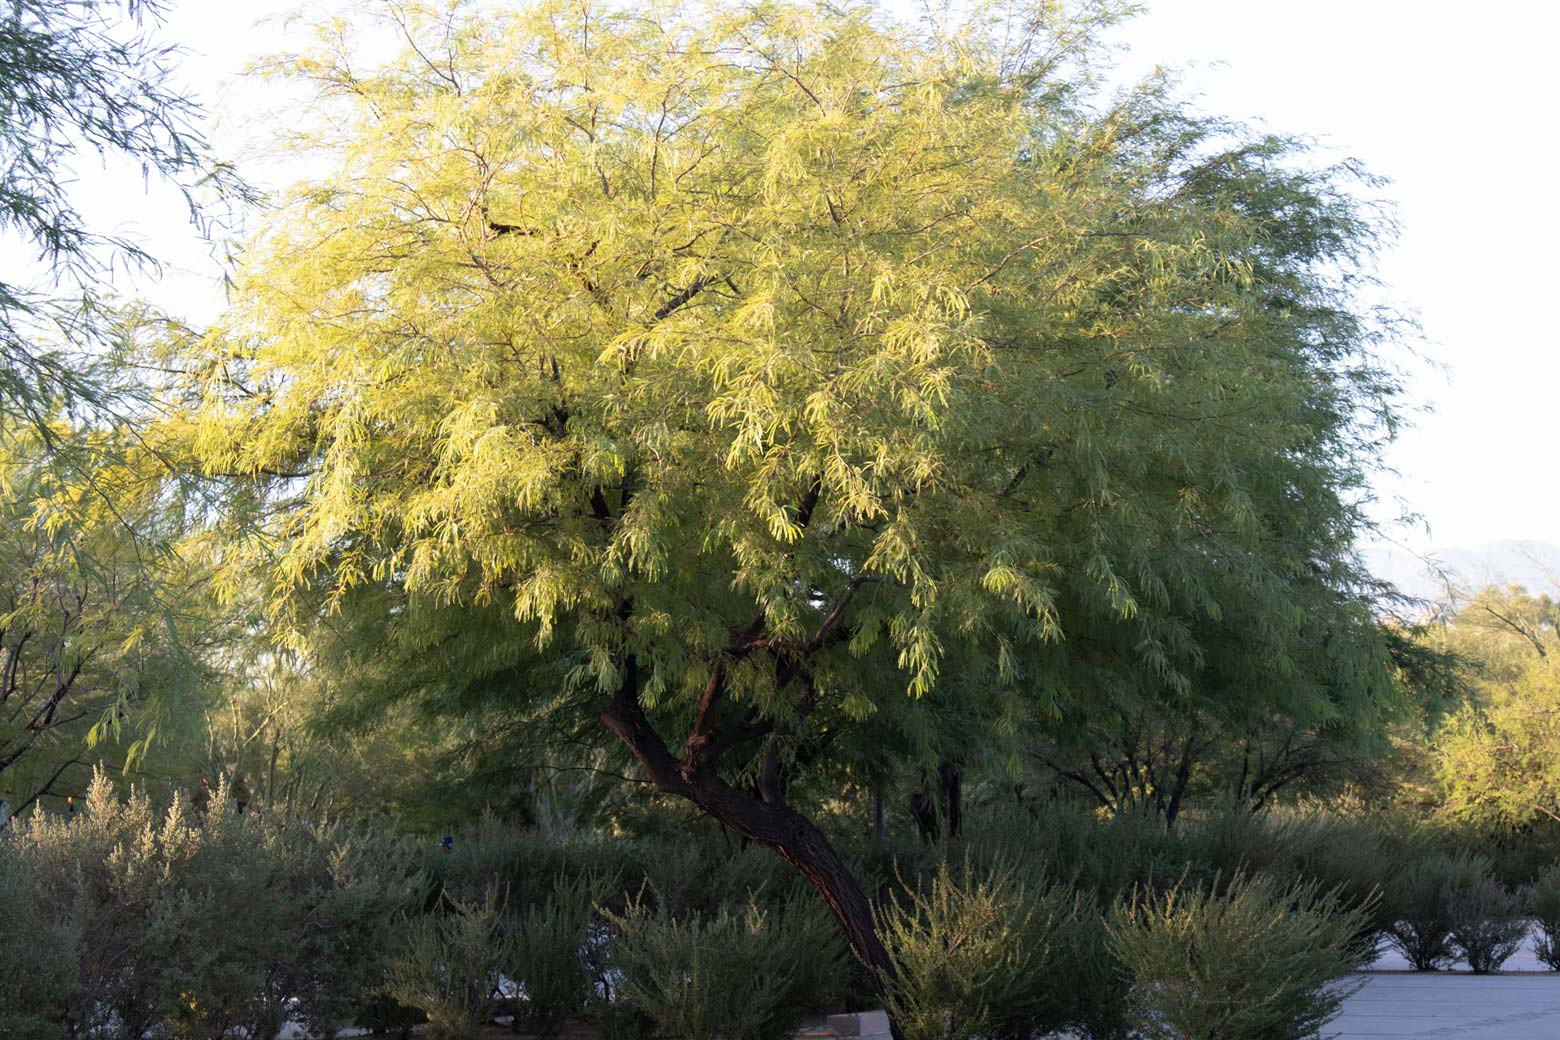 A full Mesquite tree at Sunnylands Center and Gardens.